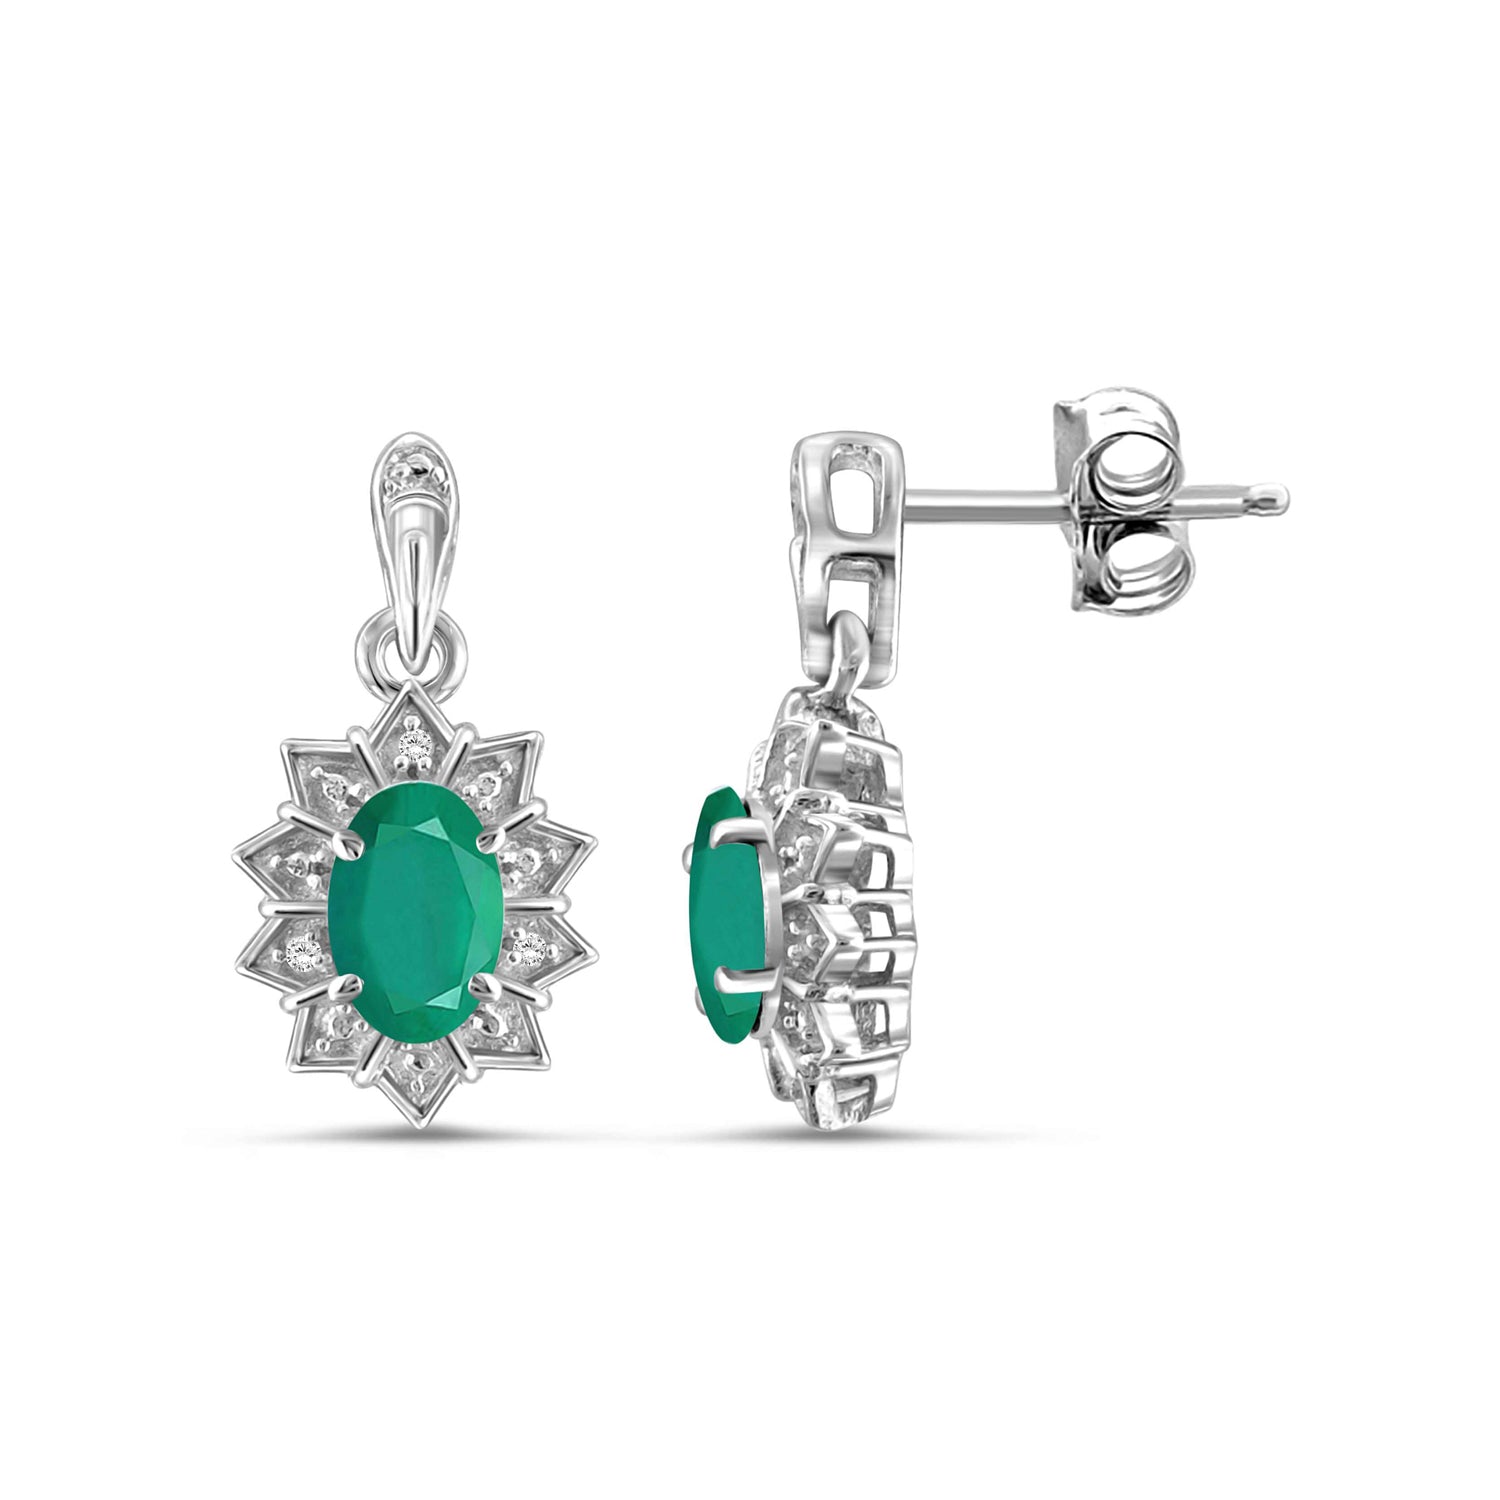 3/4 Carat T.G.W. Emerald And White Diamond Accent Sterling Silver Stud Earrings